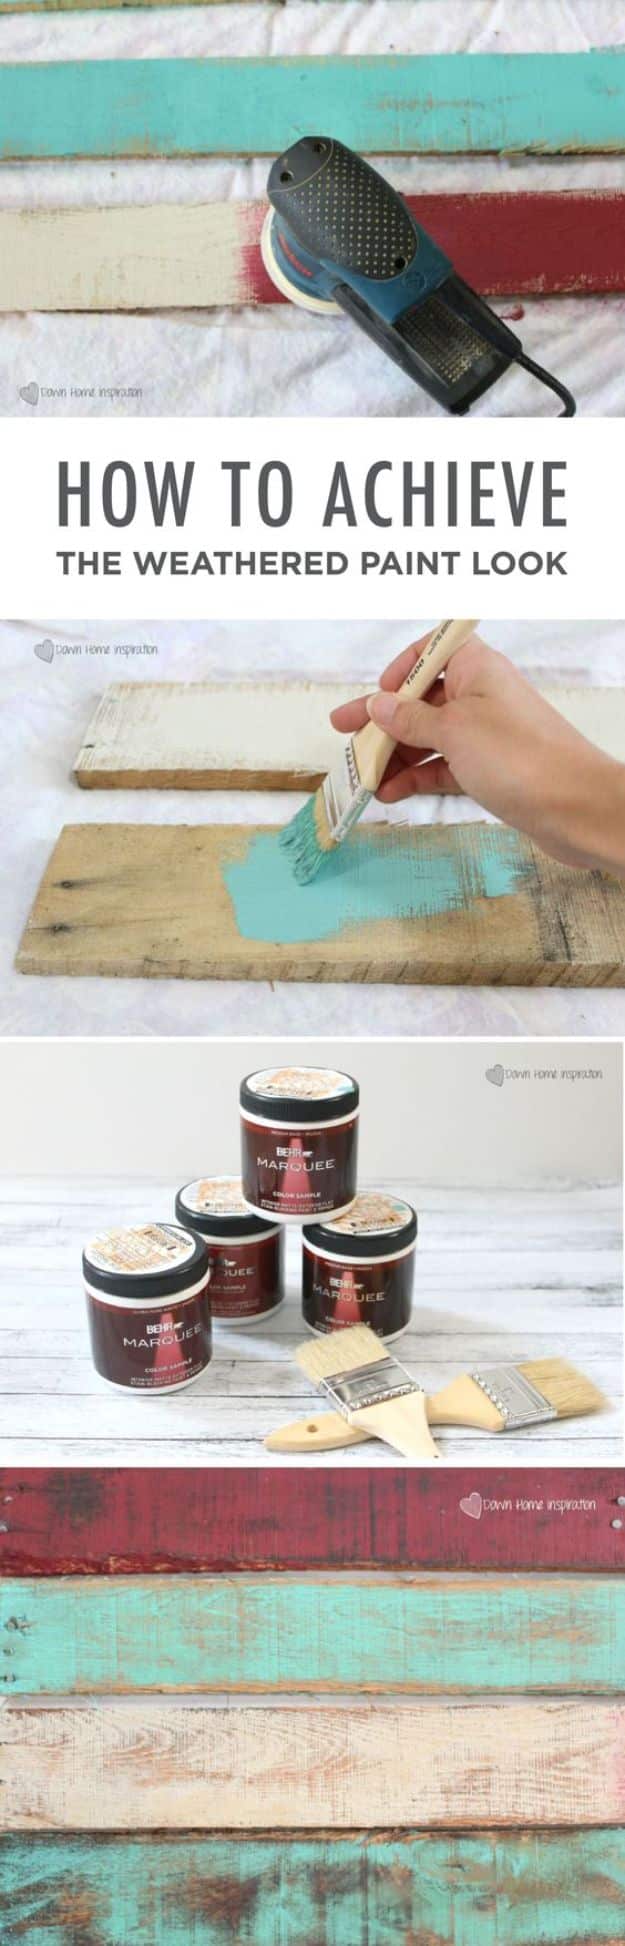 DIY Painting Hacks - Achieve the Weathered Paint Look - Easy Ways To Shortcut House Painting - Wall Prep, Painters Tape, Trim, Edging, Ceiling, Exterior Cutting In, Furniture and Crafts Paint Tips - Paint Your House Or Your Room With These Time Saving Painter Hacks and Quick Tricks http://diyjoy.com/diy-painting-hacks